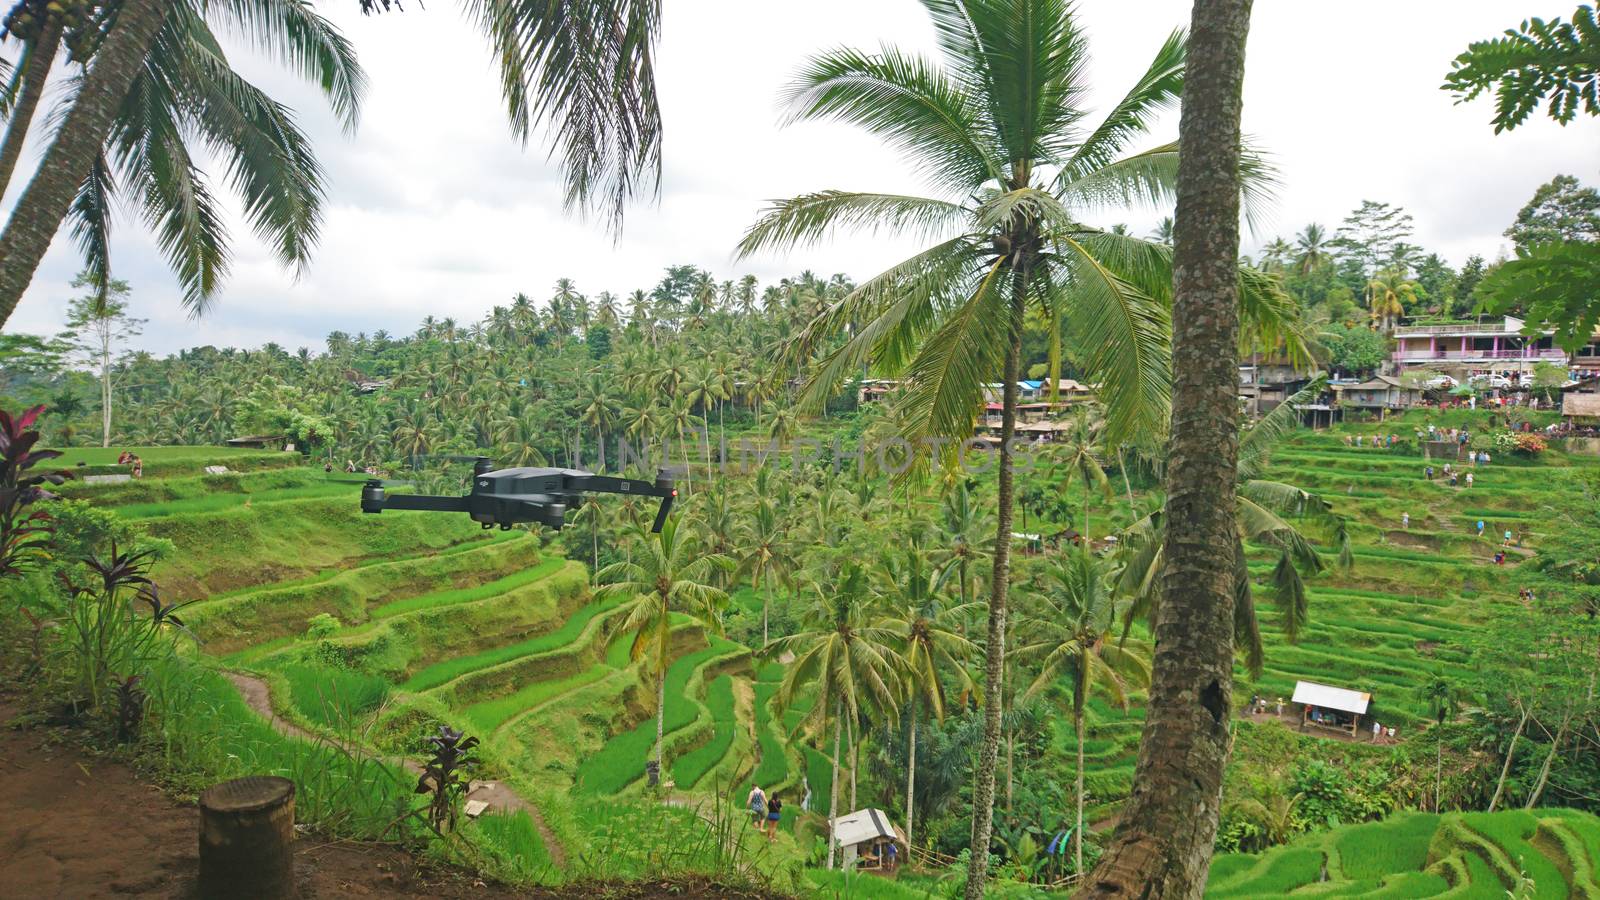 A DJI Mavic drone hovers in the air among palm trees and rice terraces. Green plantations of rice fields, tall palm trees and a quadrocopter shoots video. The process of shooting on the island of Bali